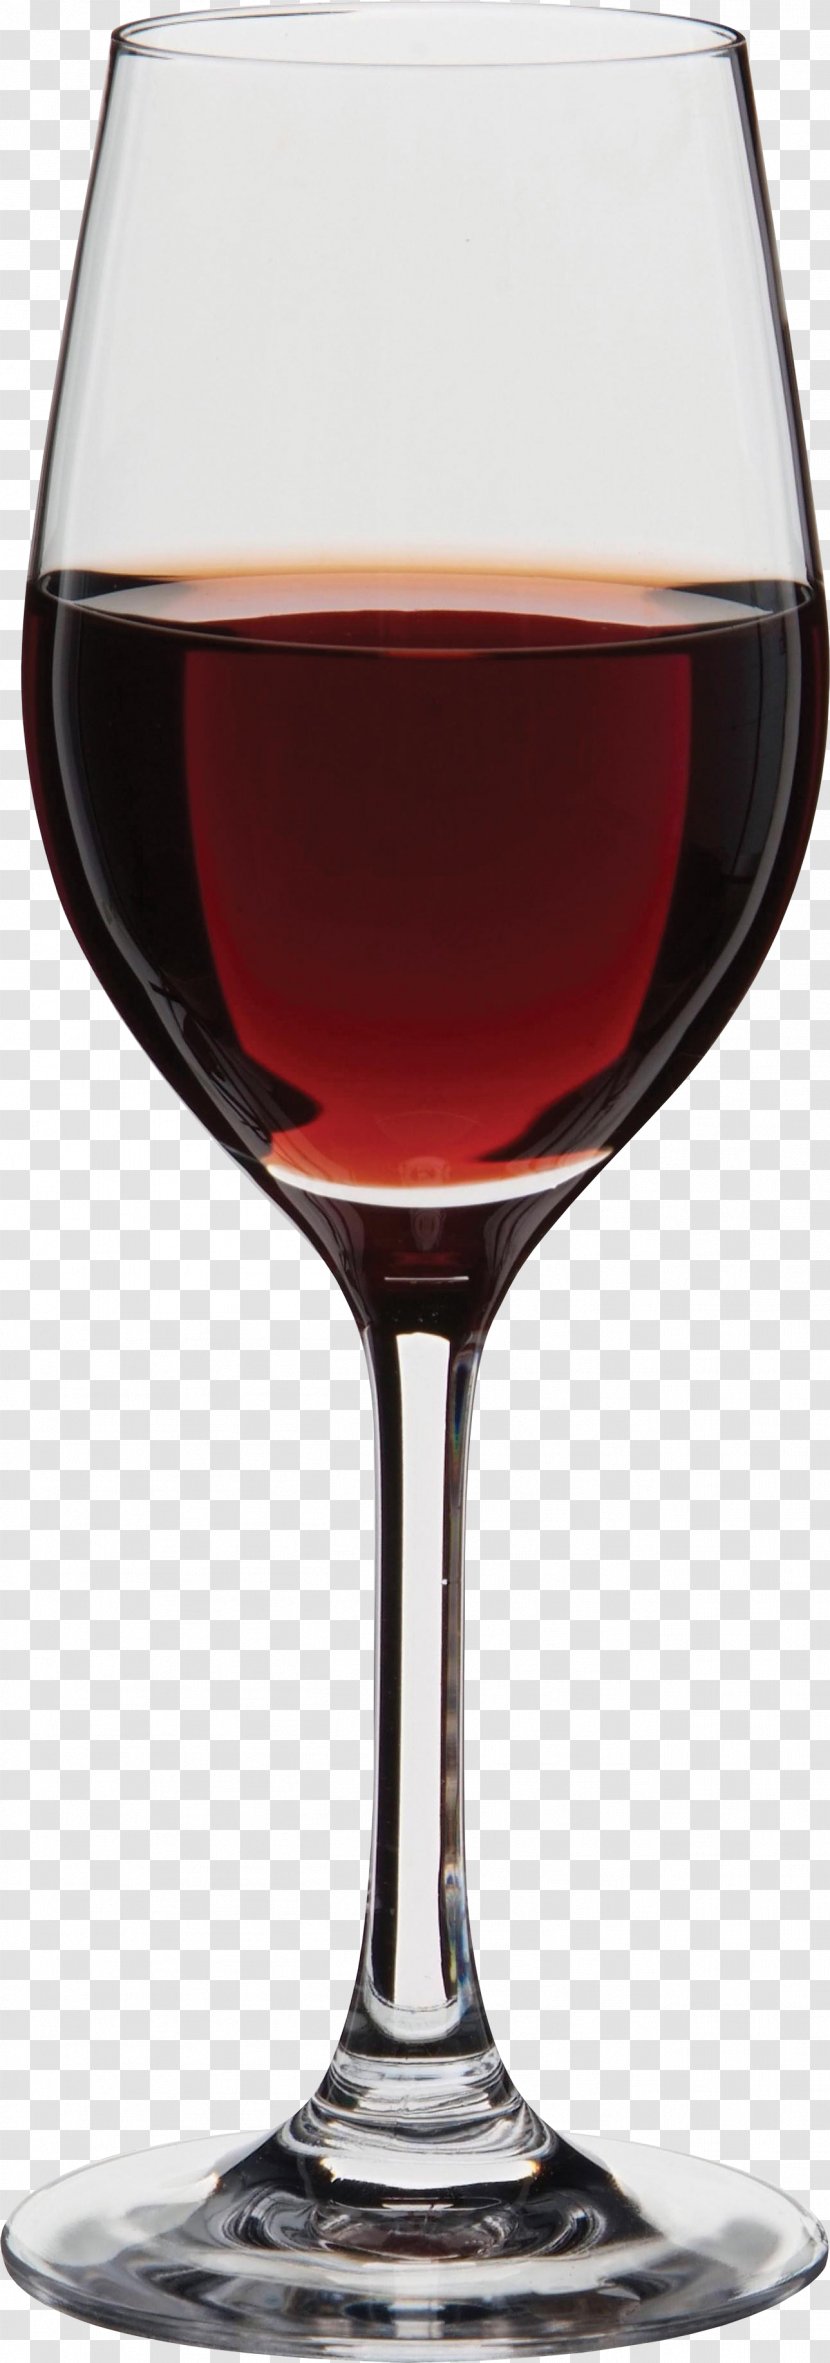 Red Wine Port Glass Fortified - Image Transparent PNG